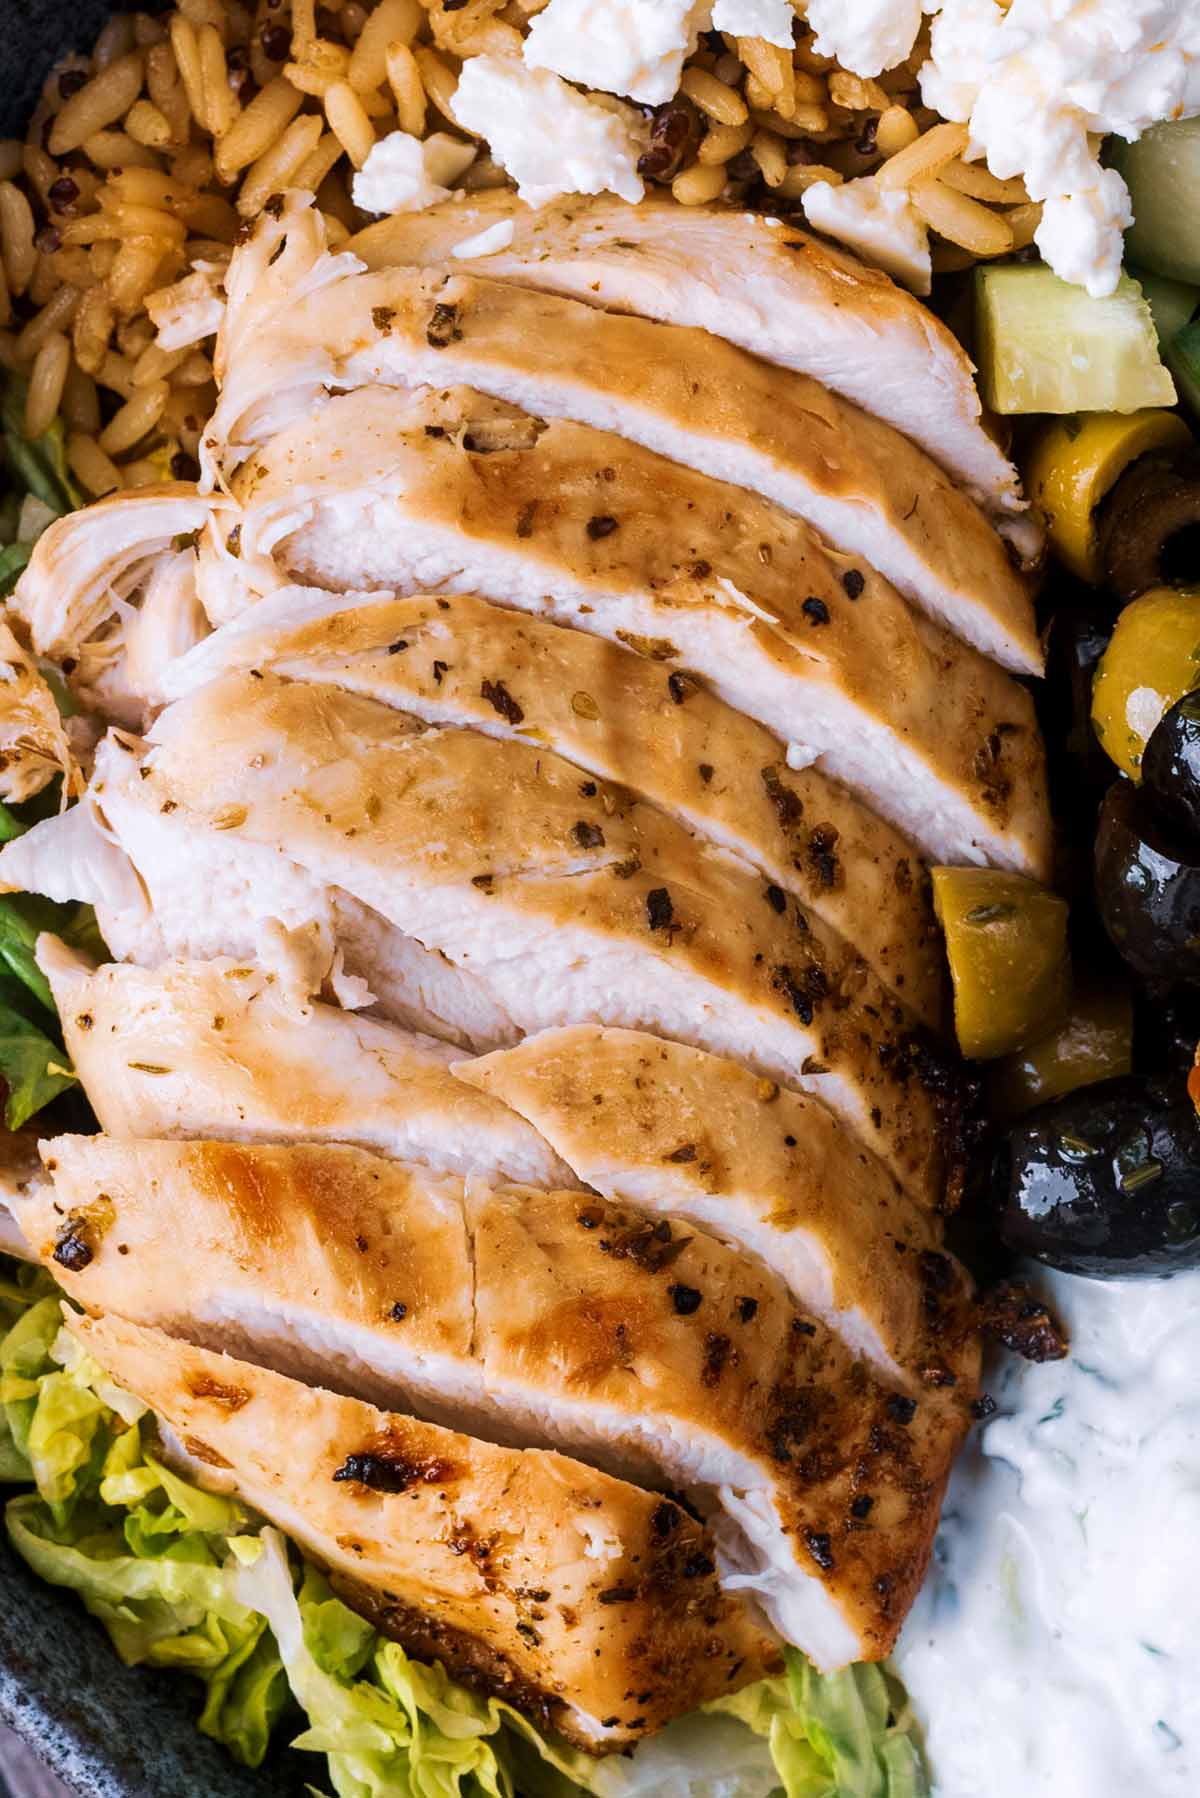 Sliced cooked chicken breast.